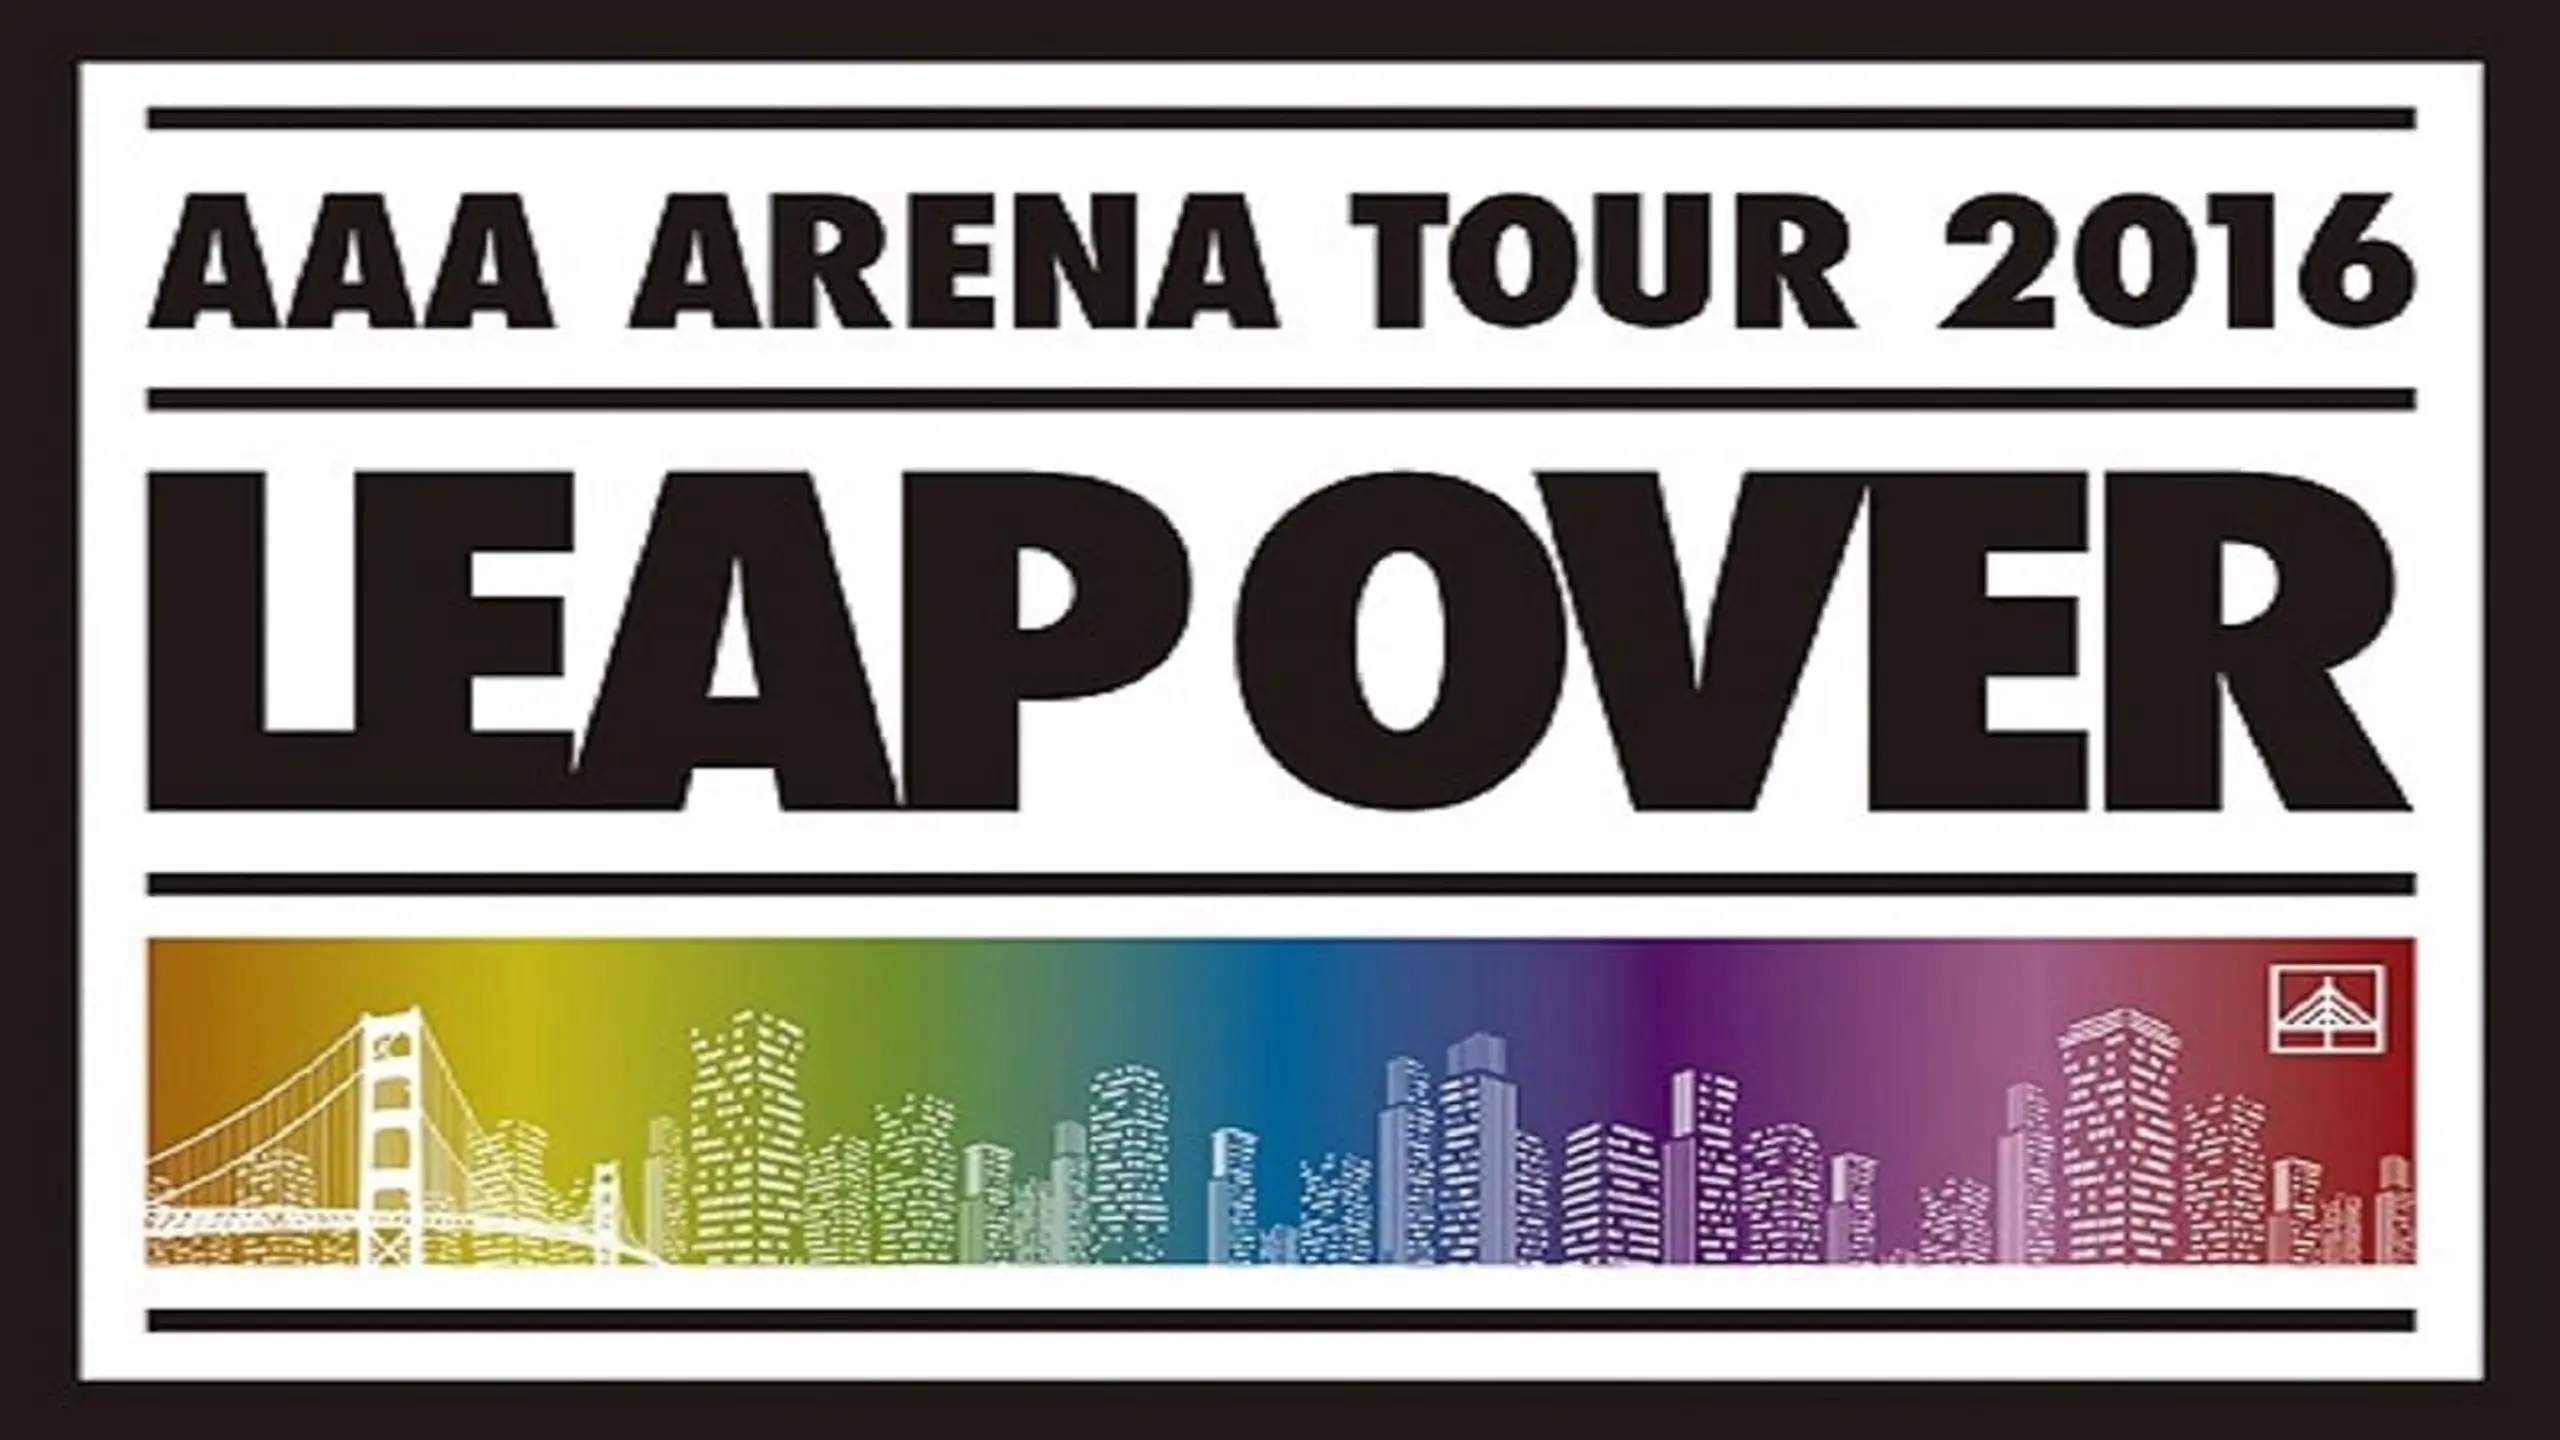 AAA Arena Tour 2016: LEAP OVER